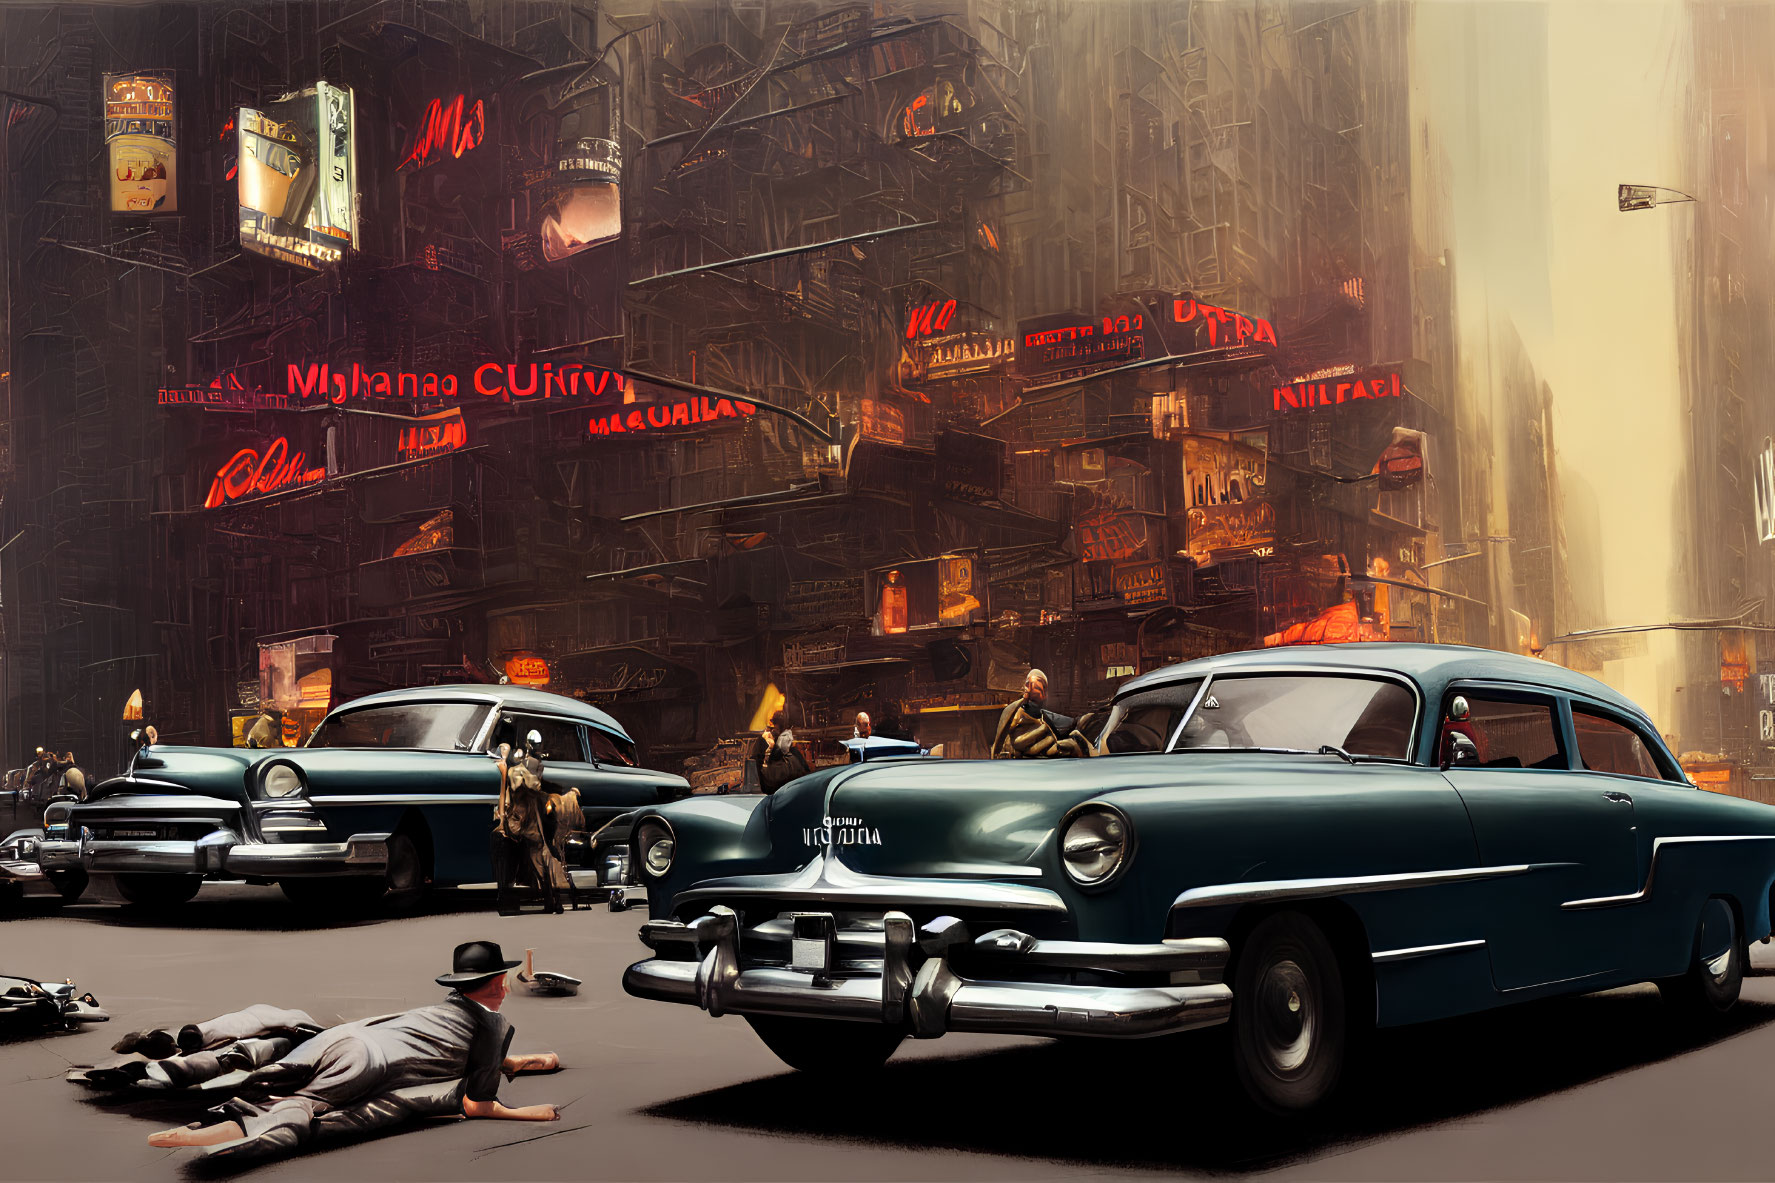 Vintage Cars and Neon Signs in 1950s Urban Street Scene